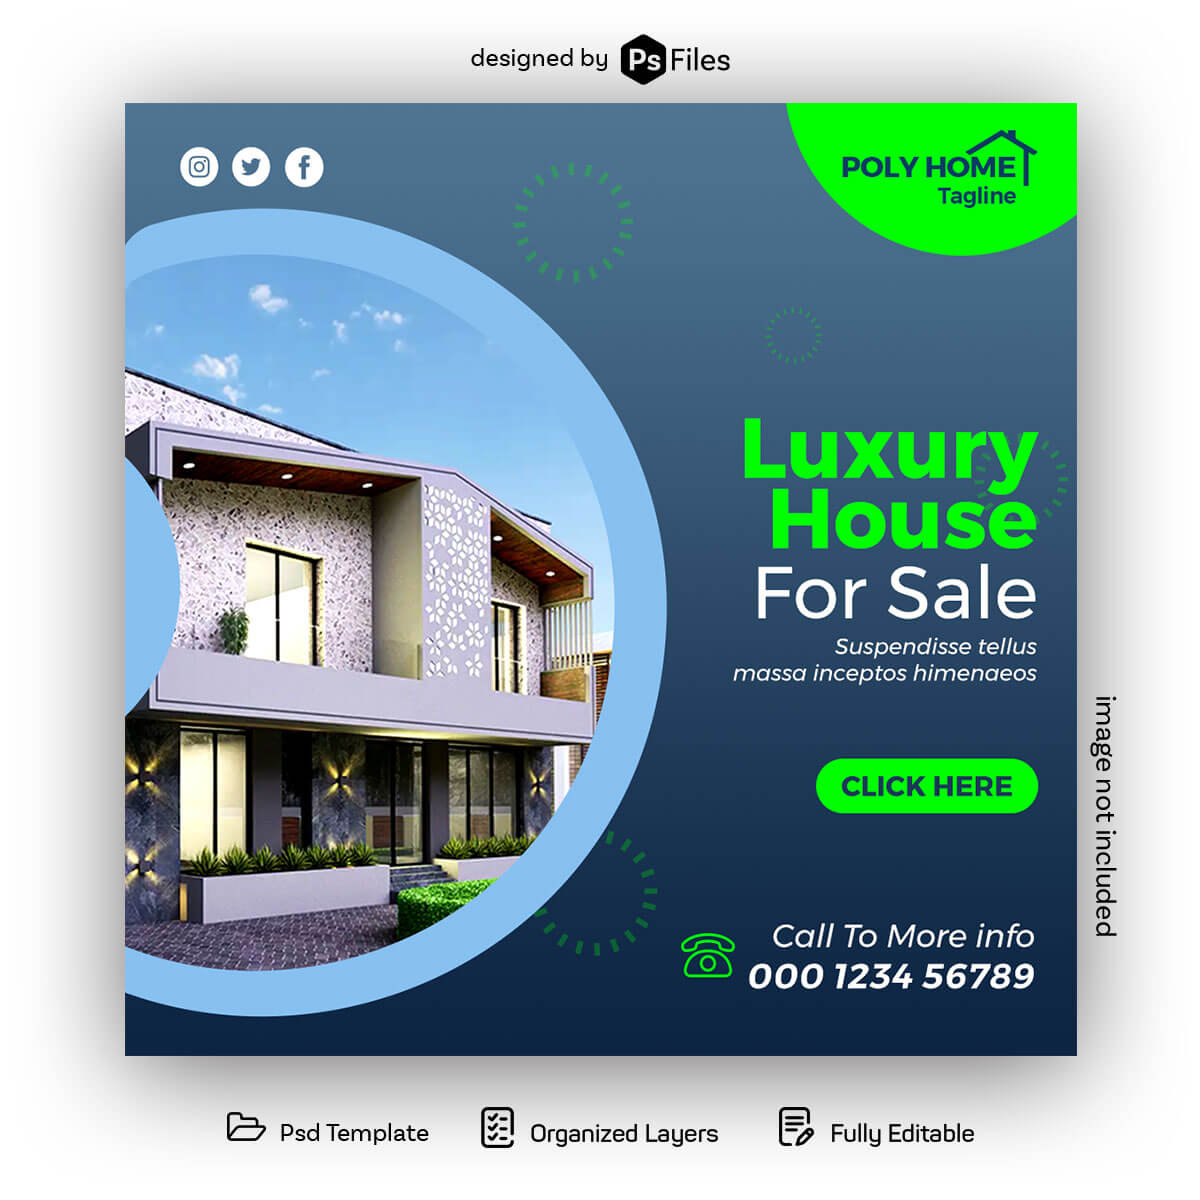 Luxury Home for Sale Social Media Post Design PSD Template Free Download